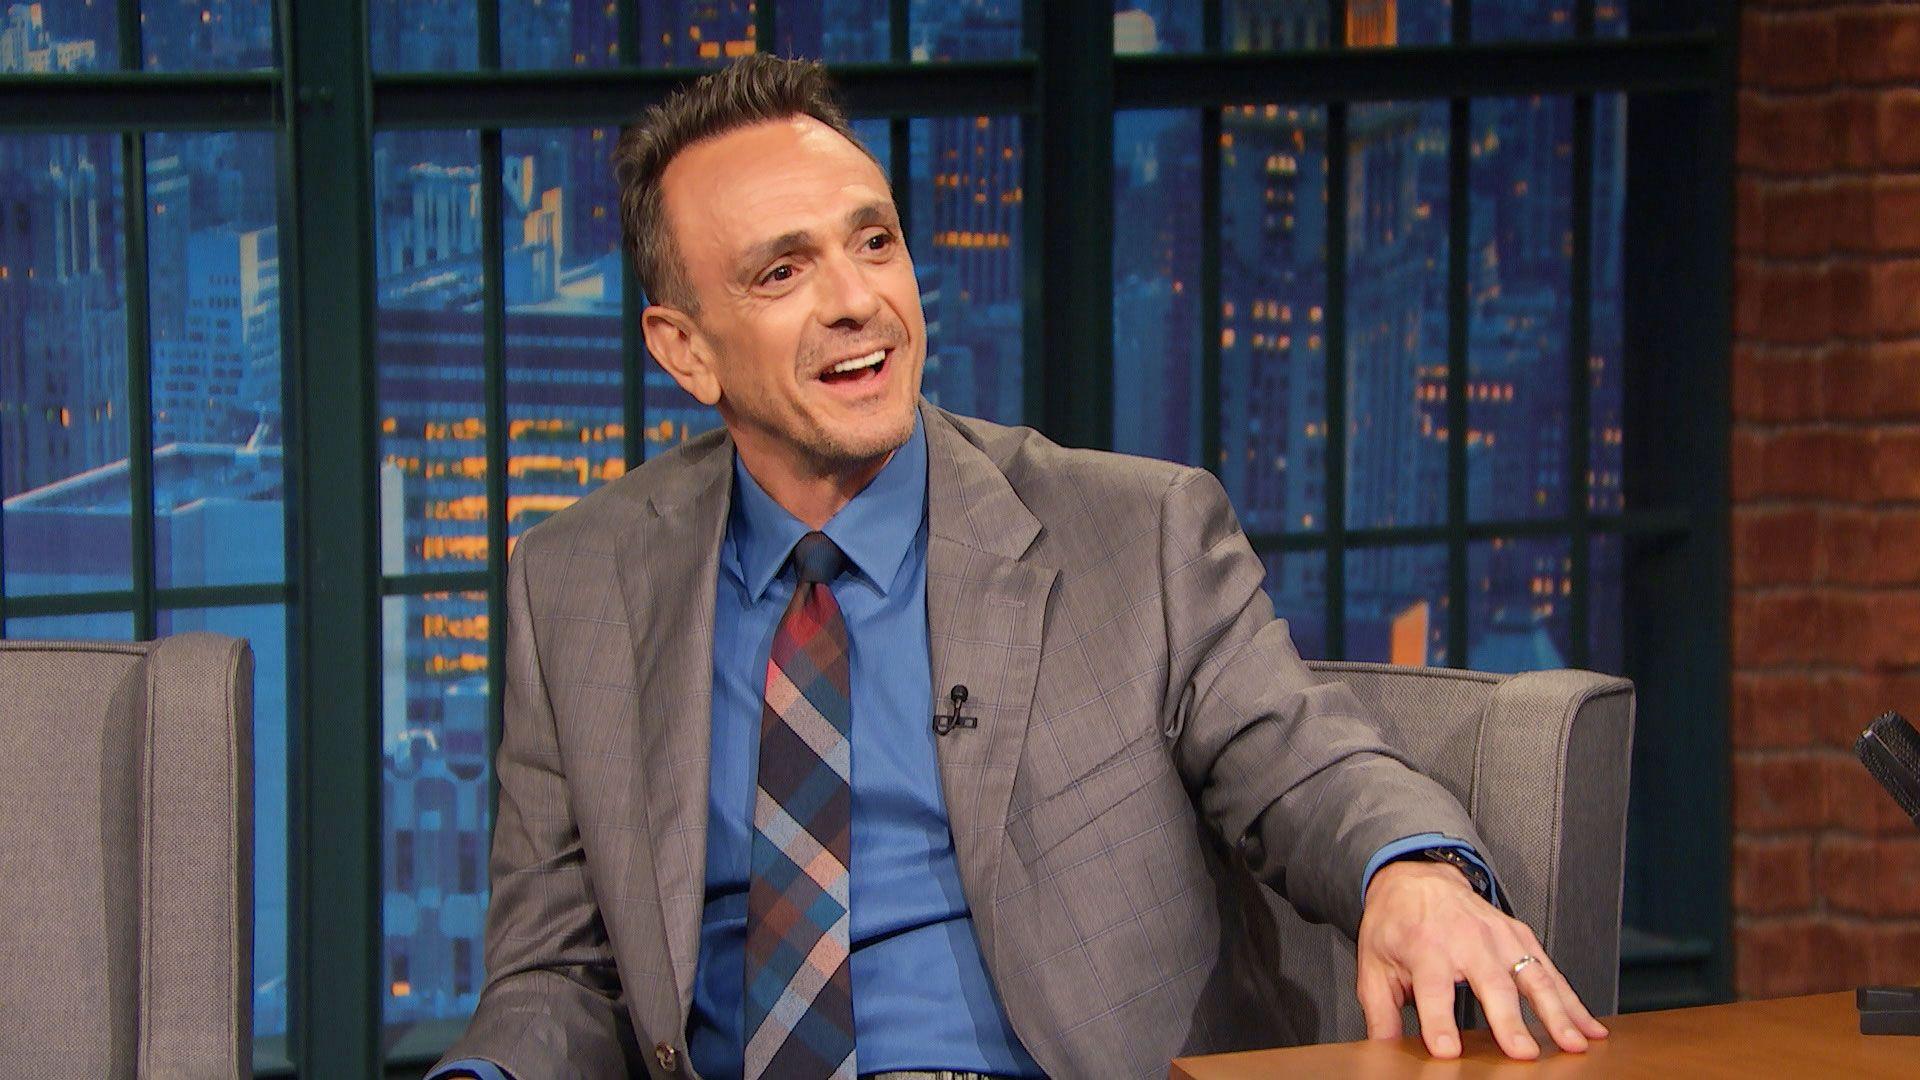 Watch Late Night with Seth Meyers Interview: Hank Azaria Gave His